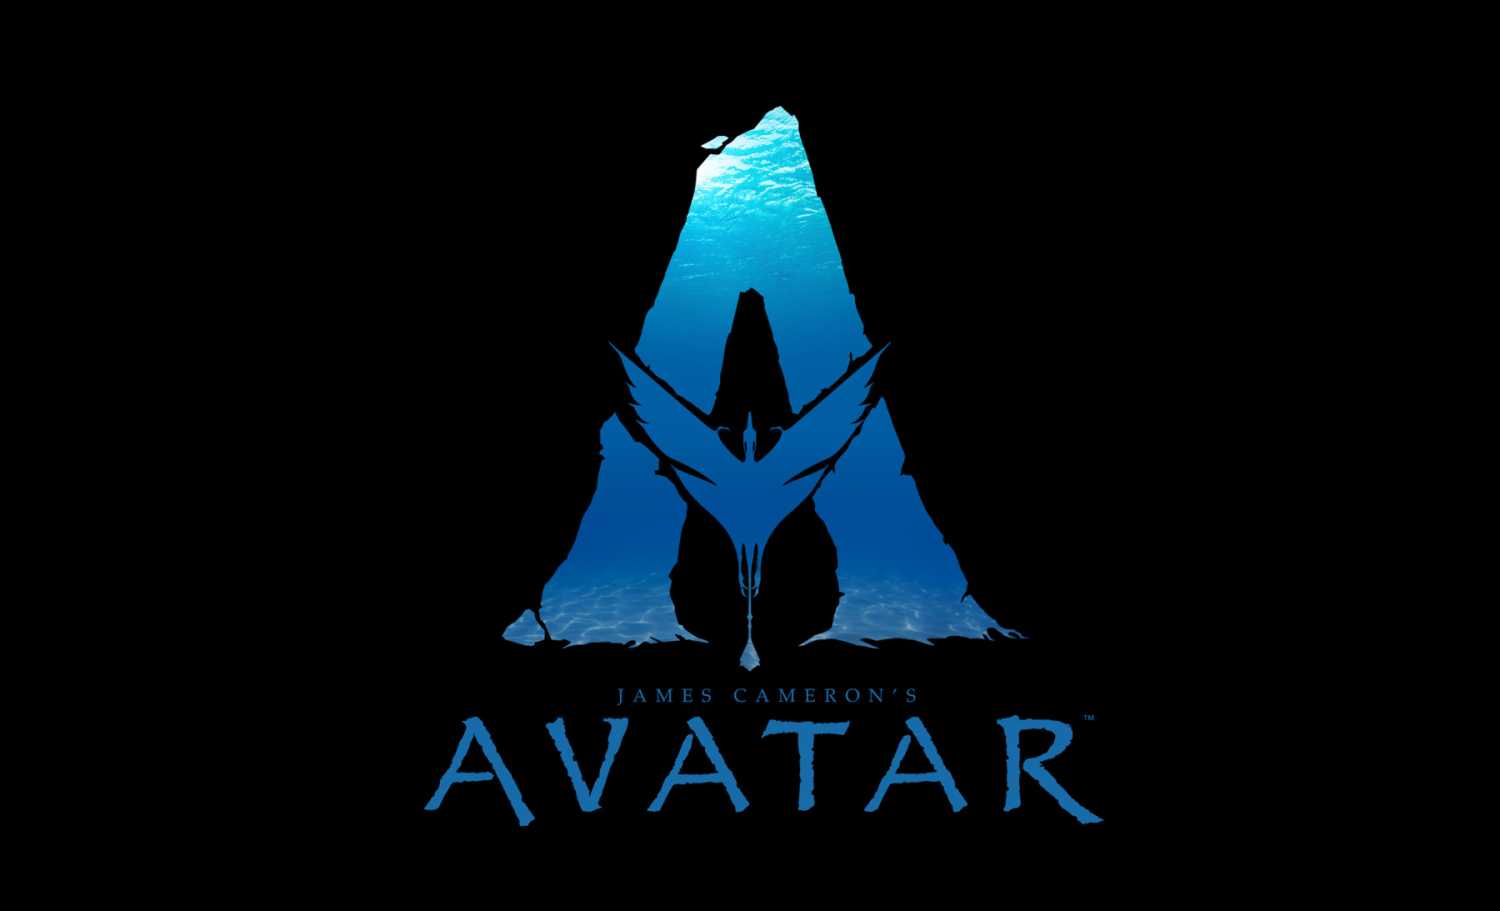 Avatar 2 is currently scheduled for December 2022 release